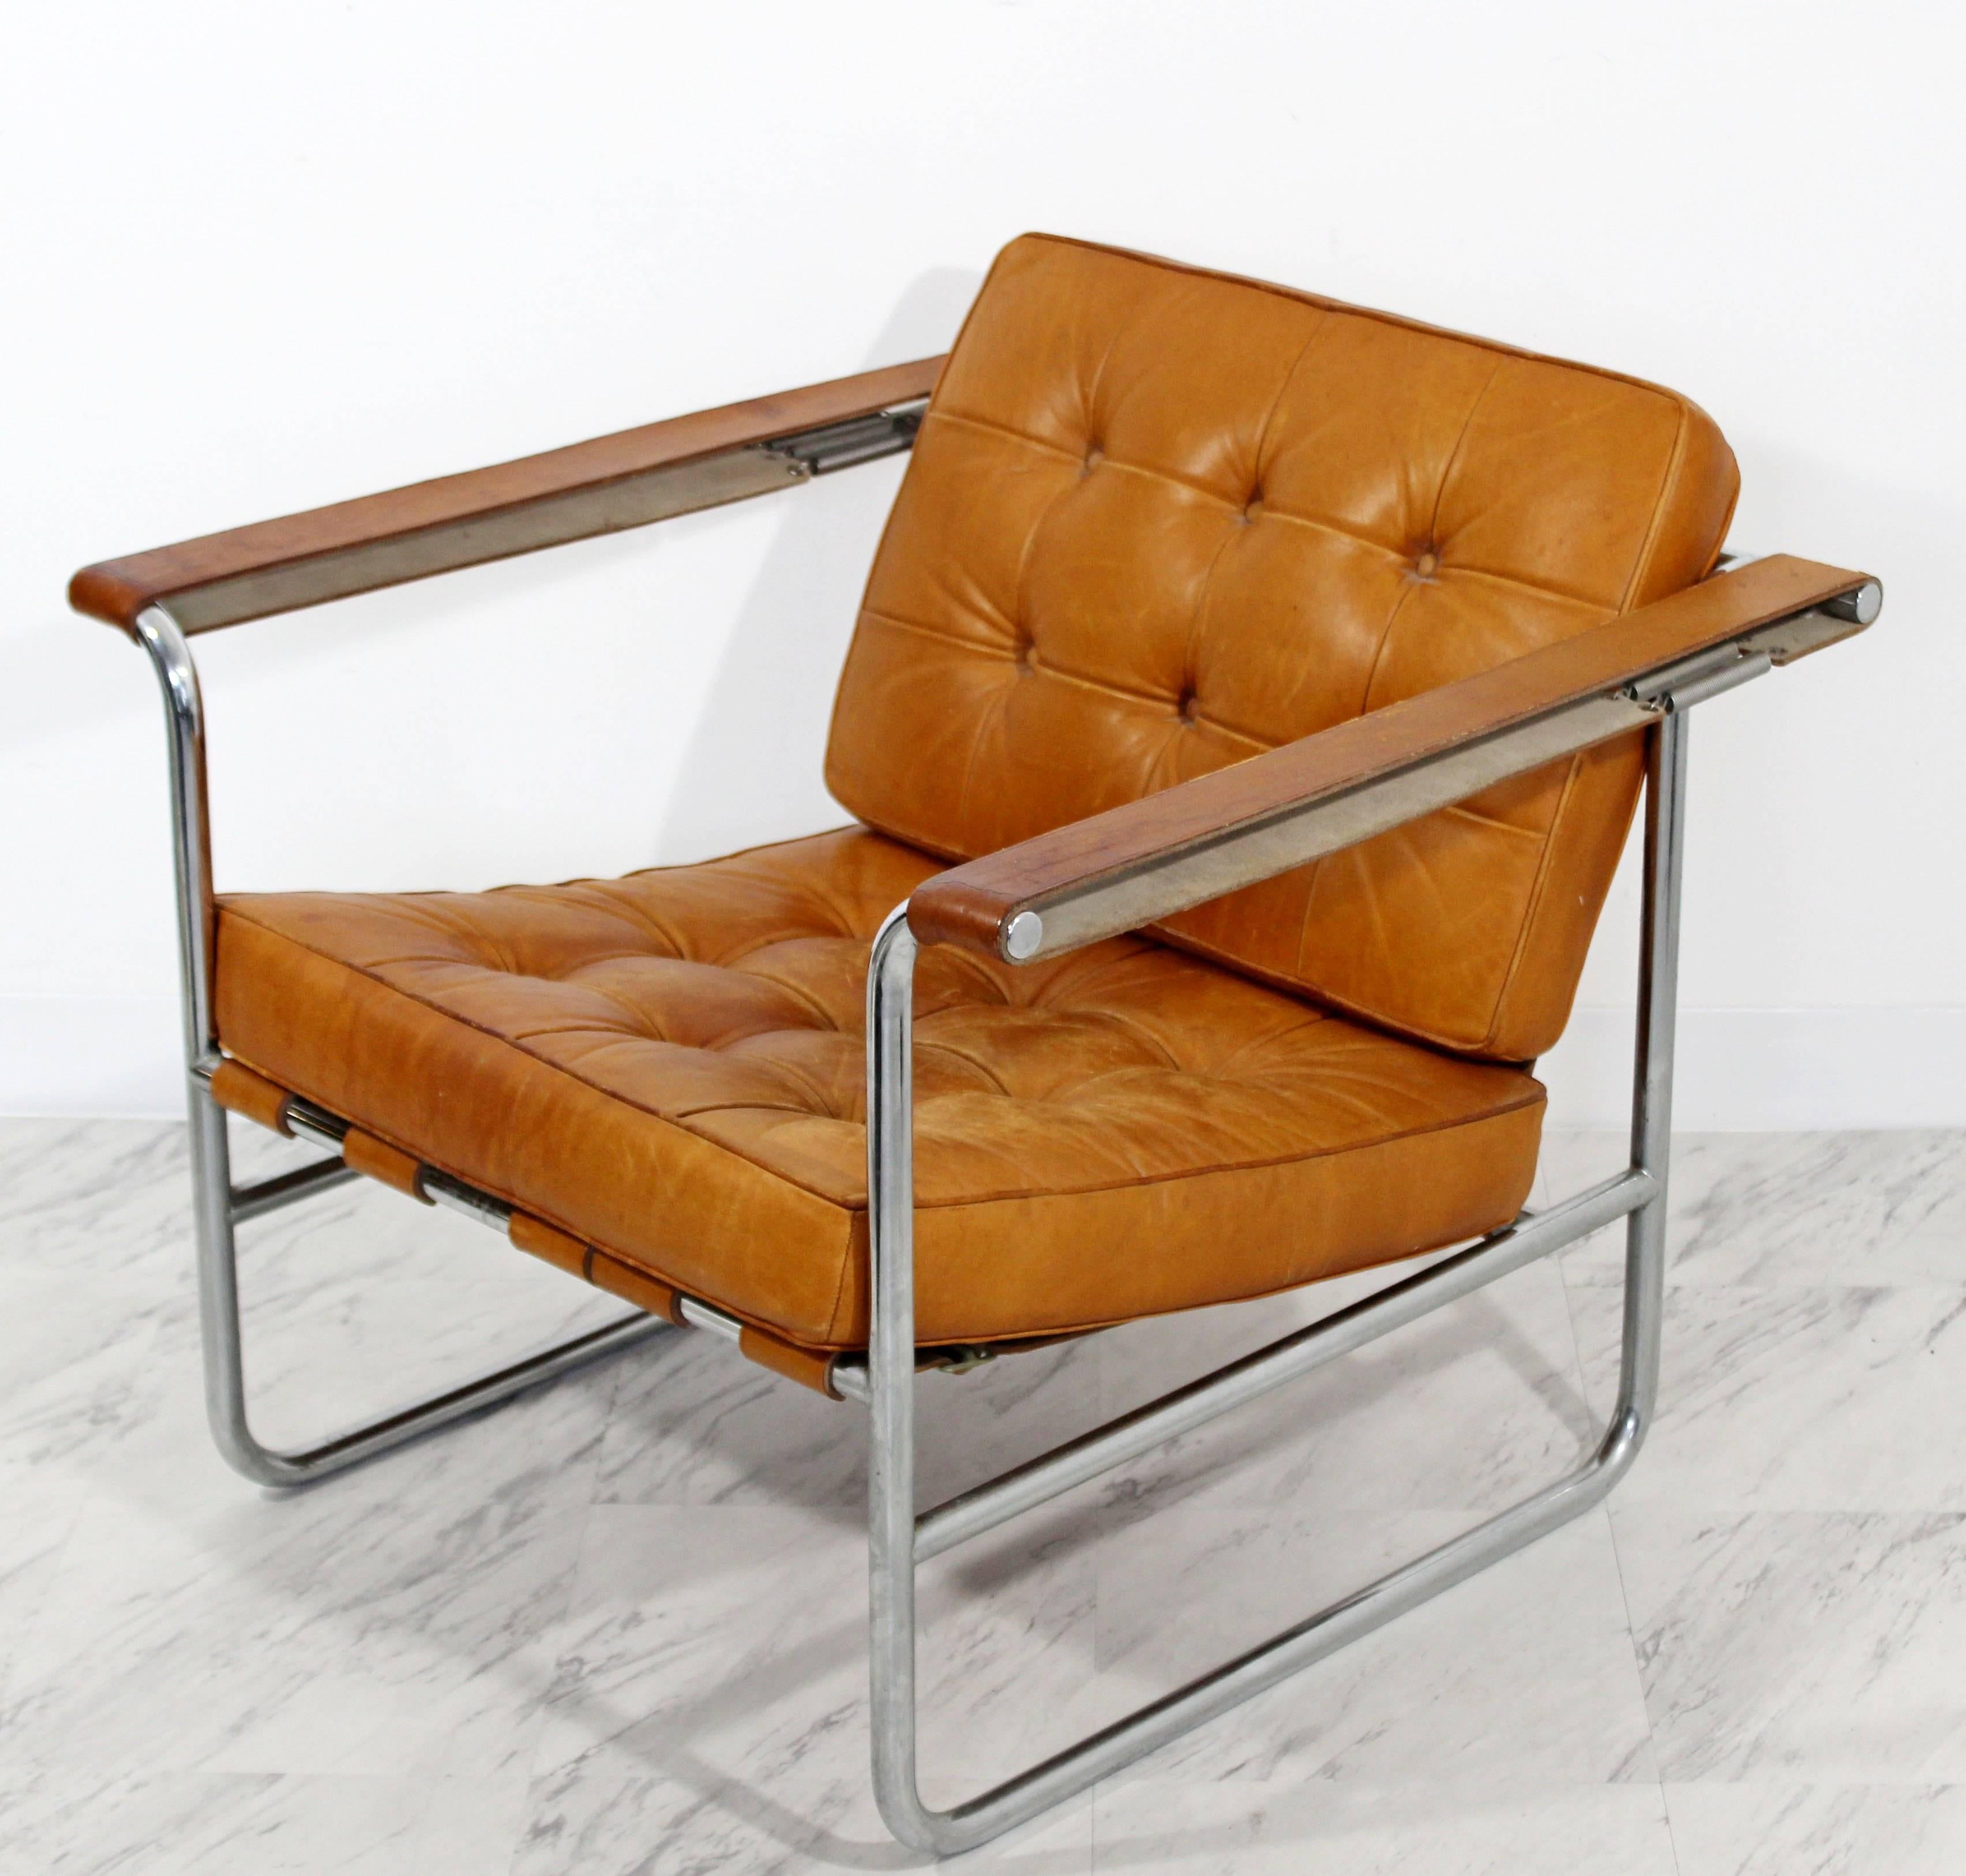 For your consideration is an original, brown leather and chrome, lounge chair, designed by Hans Eichenberger for De Sede Switzerland, imported by Stendig. Made in Switzerland, circa the 1970s. In great condition, with amazing patina to the leather.